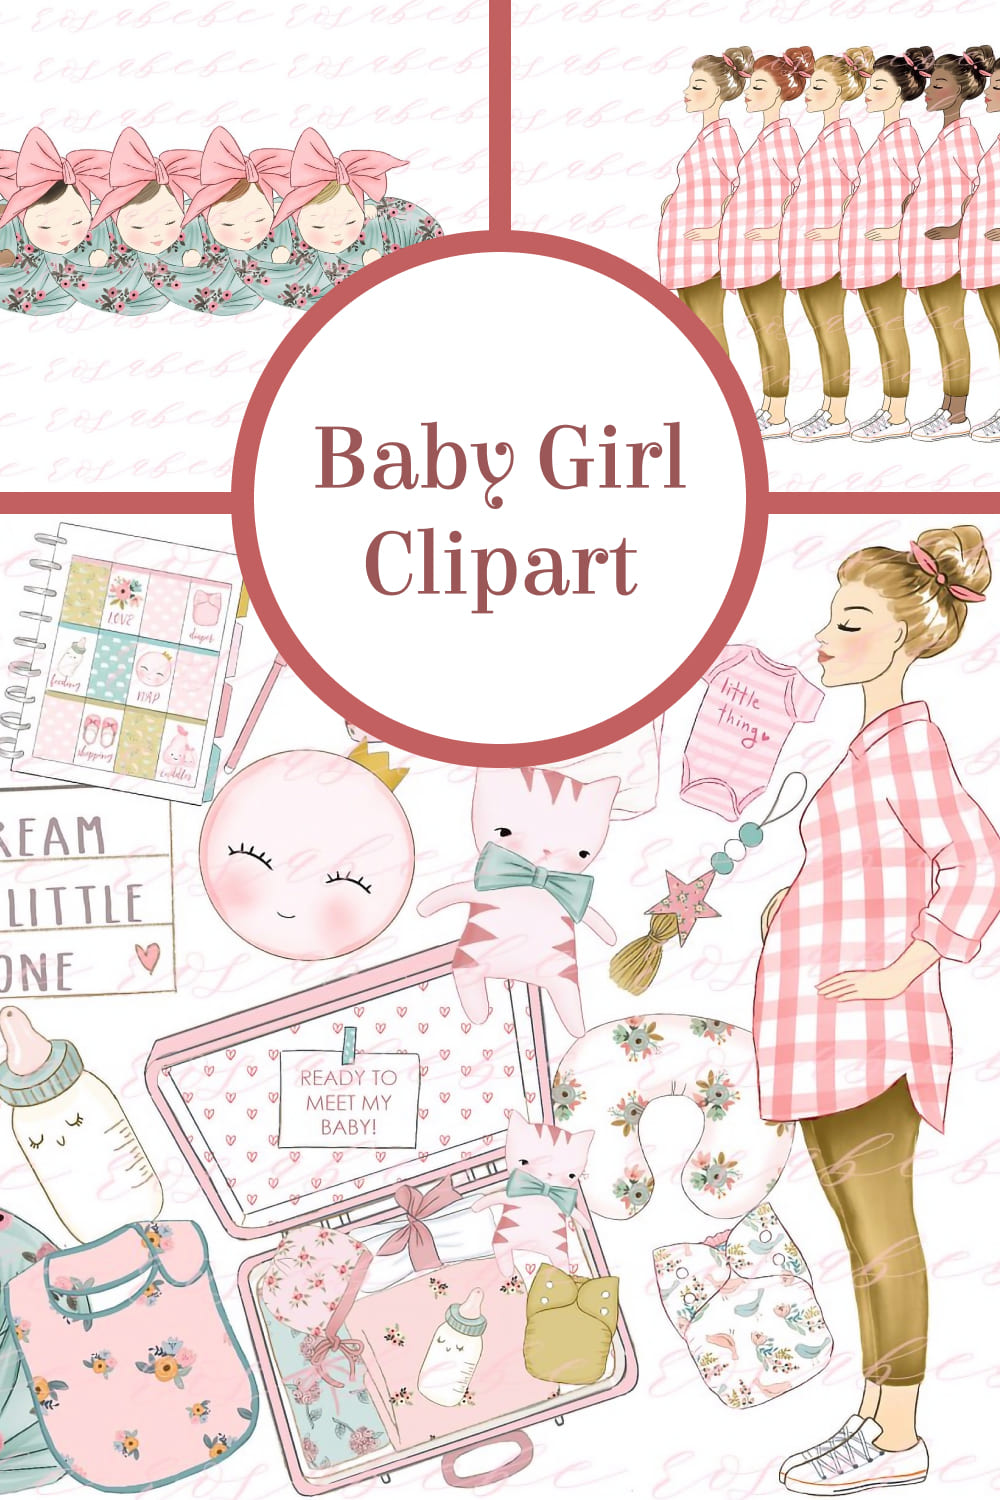 Baby Girl clipart - pinterest image preview.